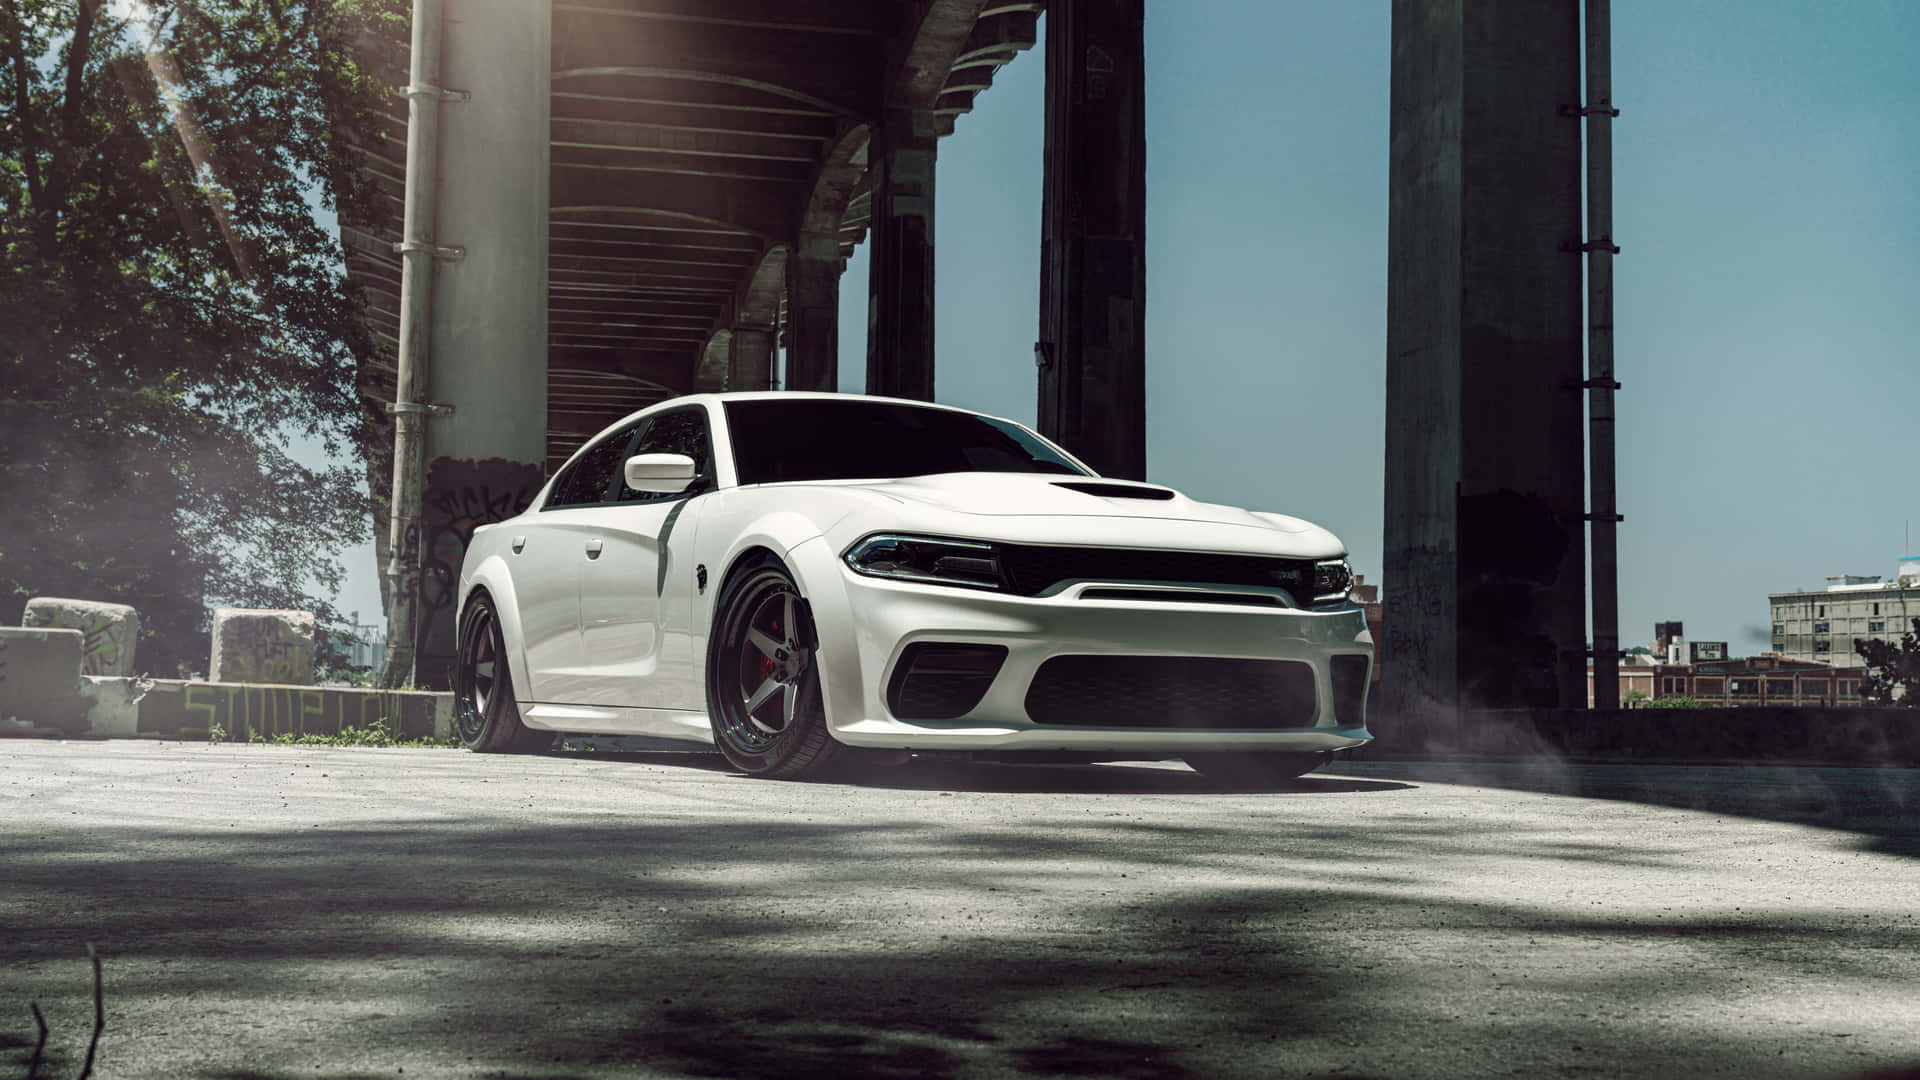 Experience Aggressive Speed and Power with the Dodge Hellcat Wallpaper